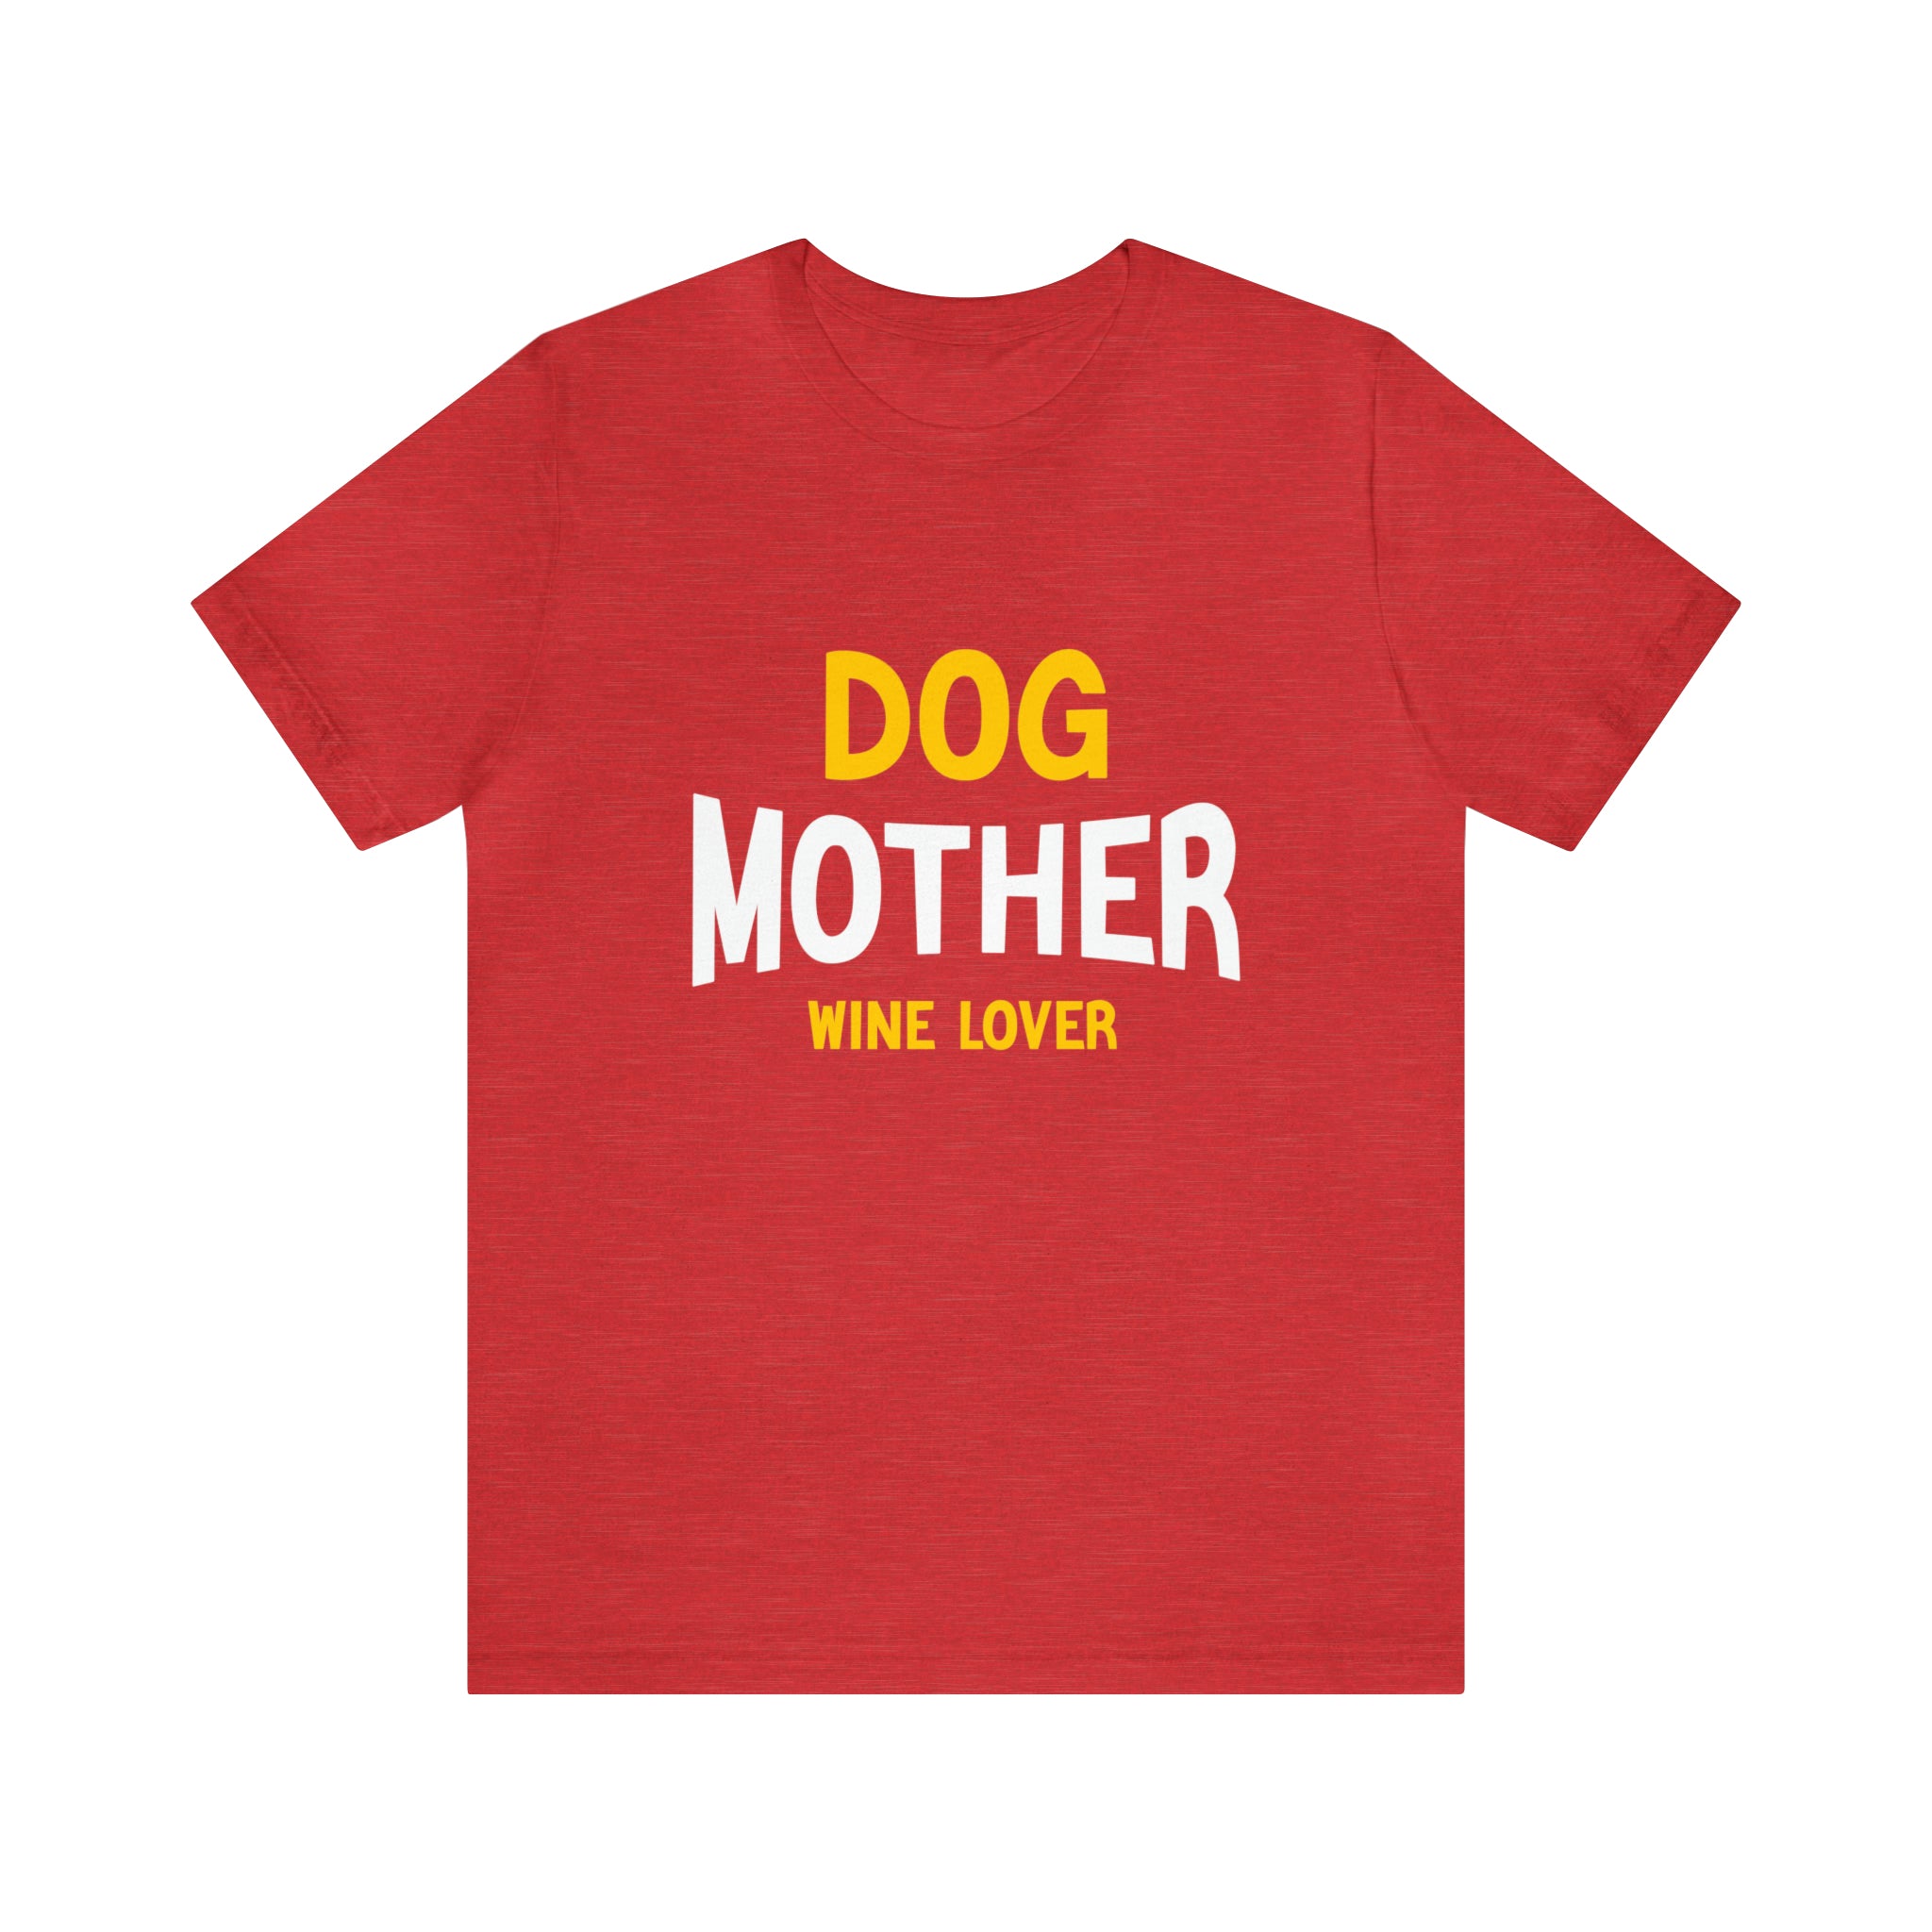 A red Dog Mother Wine Lover T-Shirt that says Dog Mother Wine Lover.